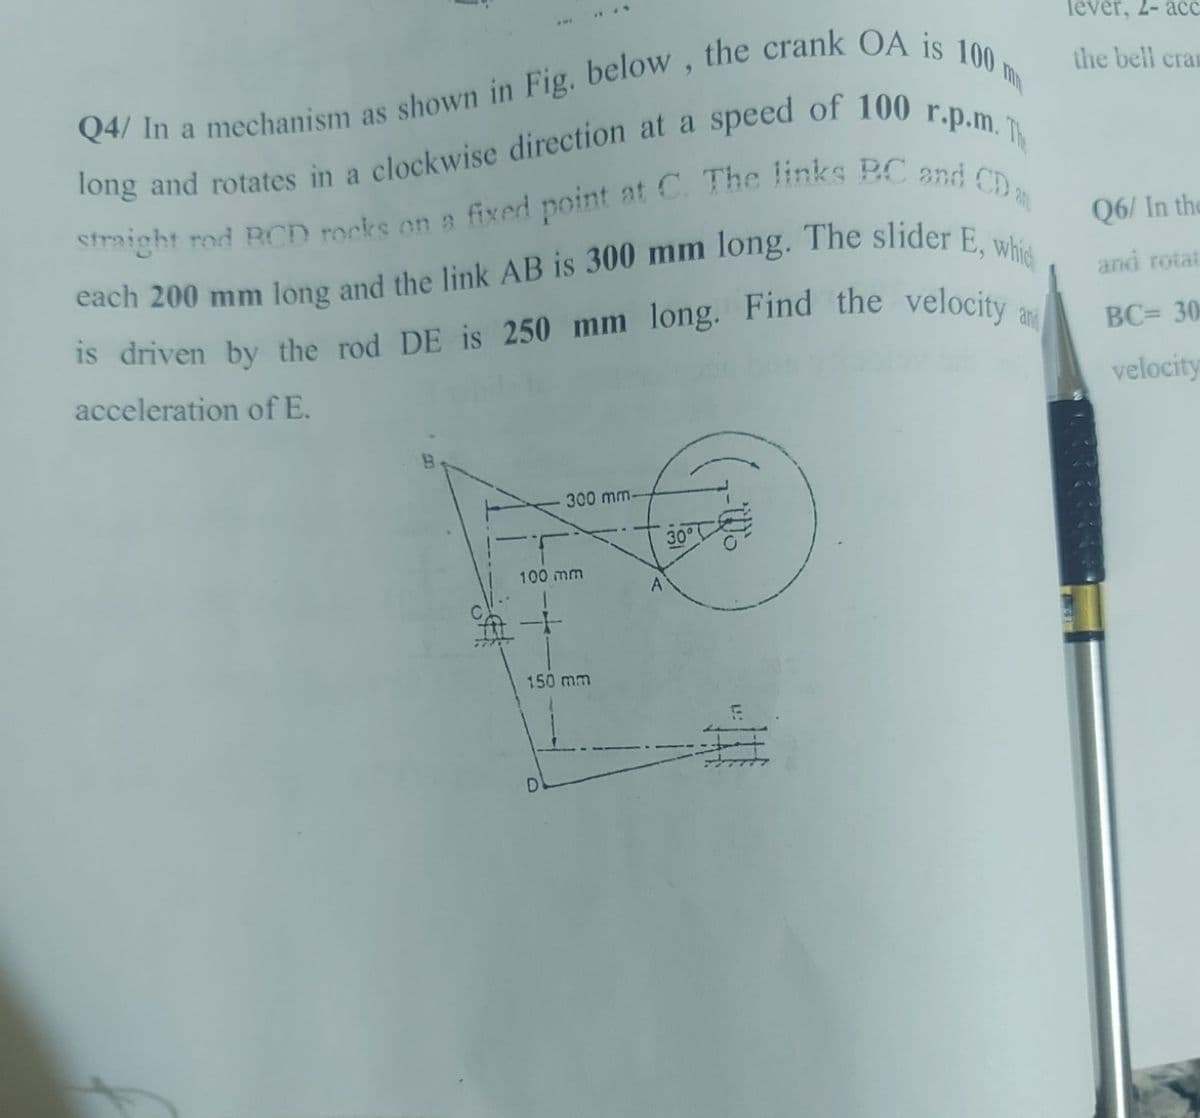 Q4/ In a mechanism as shown in Fig. below, the crank OA is 100 m
straight rod RCD rocks on a fixed point at C. The links BC and CD m
long and rotates in a clockwise direction at a speed of 100 r.p.m.
each 200 mm long and the link AB is 300 mm long. The slider E, which
is driven by the rod DE is 250 mm long. Find the velocity and
acceleration of E.
300 mm-
100 mm
150 mm
D
A
30°
lever, 2- acc
the bell cram
Q6/ In the
and rotat
BC= 30
velocity